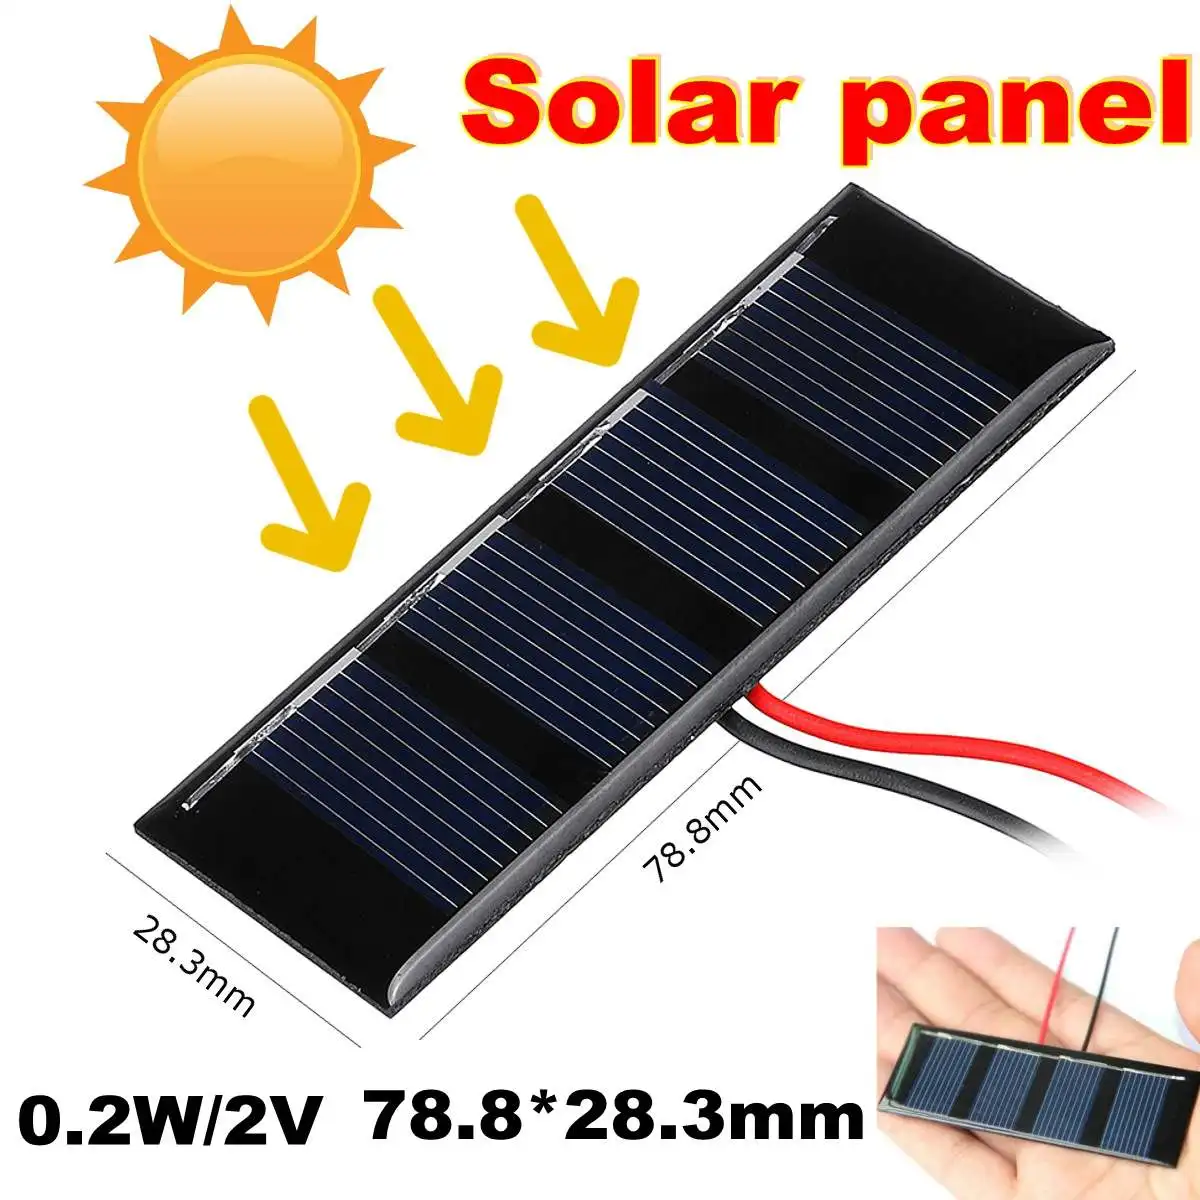 

LEORY 0.2W 2V DIY Solar Panel Polycrystalline Silicon Epoxy Board With Wire Mini Solar System DIY For for Part 78.8*28.3mm